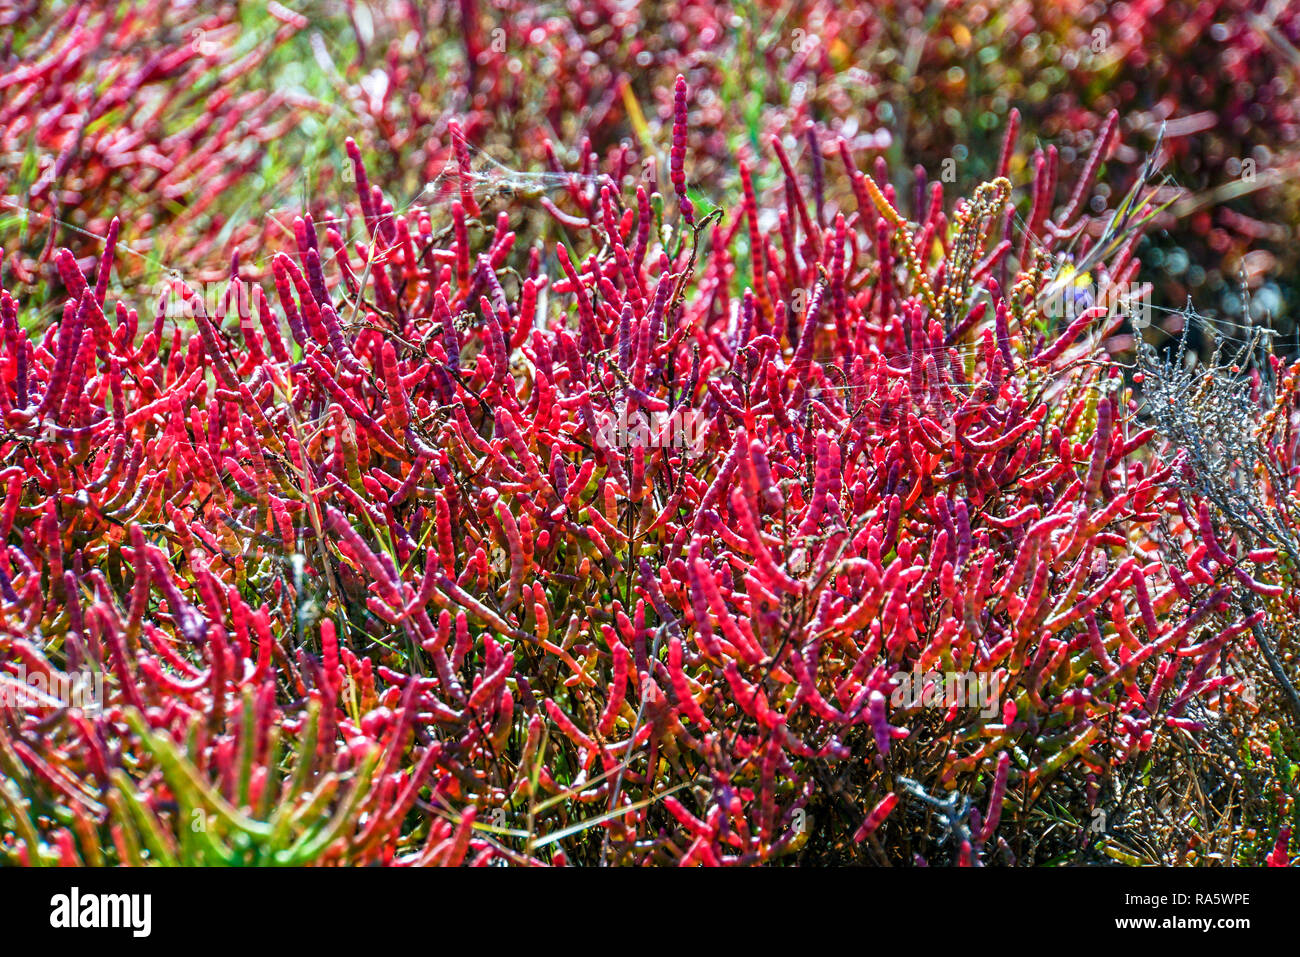 Field with red salicornia Salt-tolerant plant. Saltwort plant (Salicornia sp.) growing in a soil with a high salt content. This plant is growing in th Stock Photo